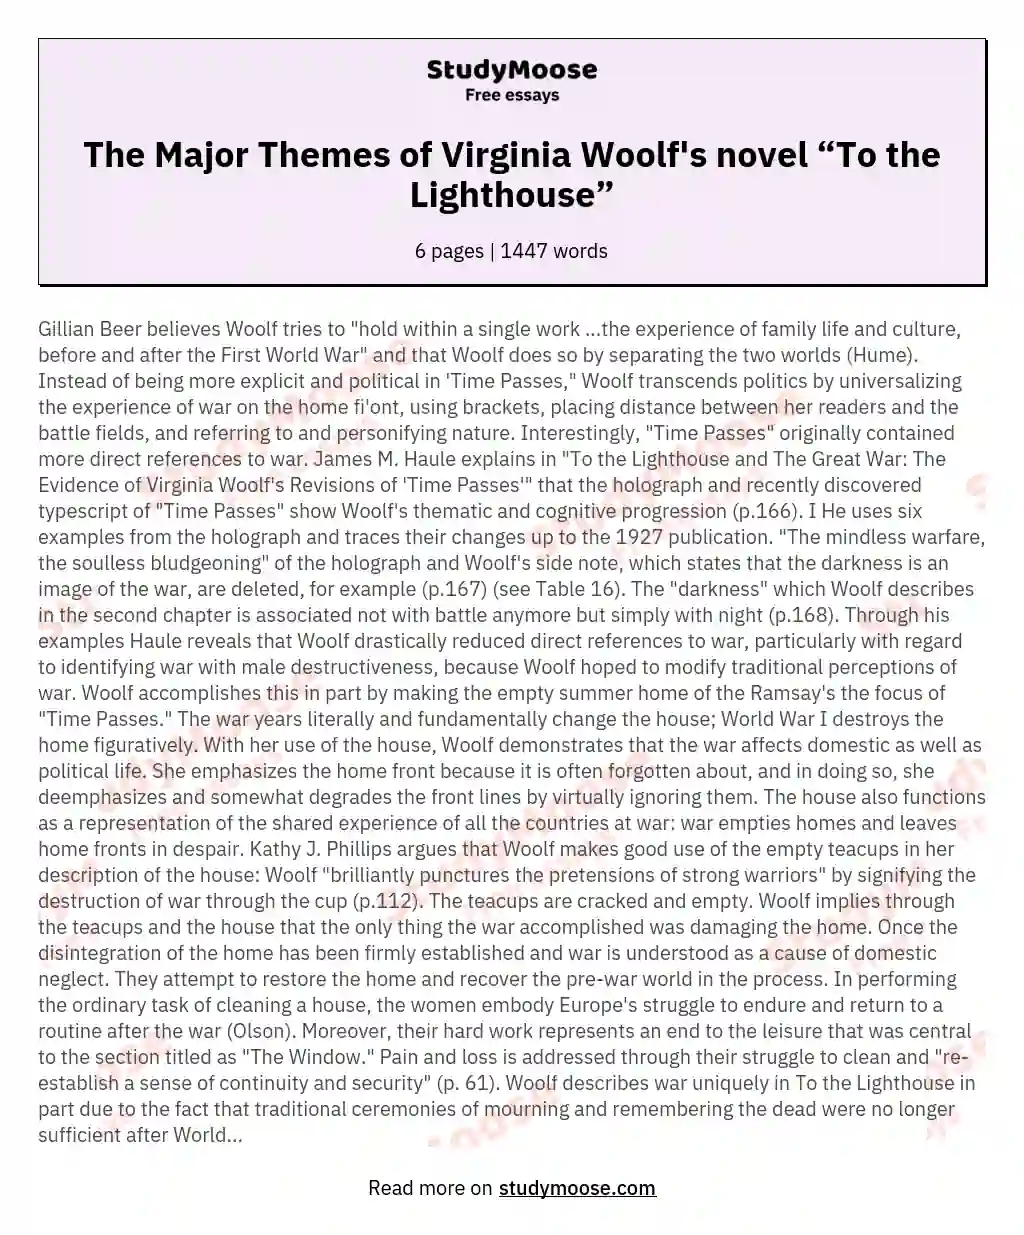 The Major Themes of Virginia Woolf's novel “To the Lighthouse”